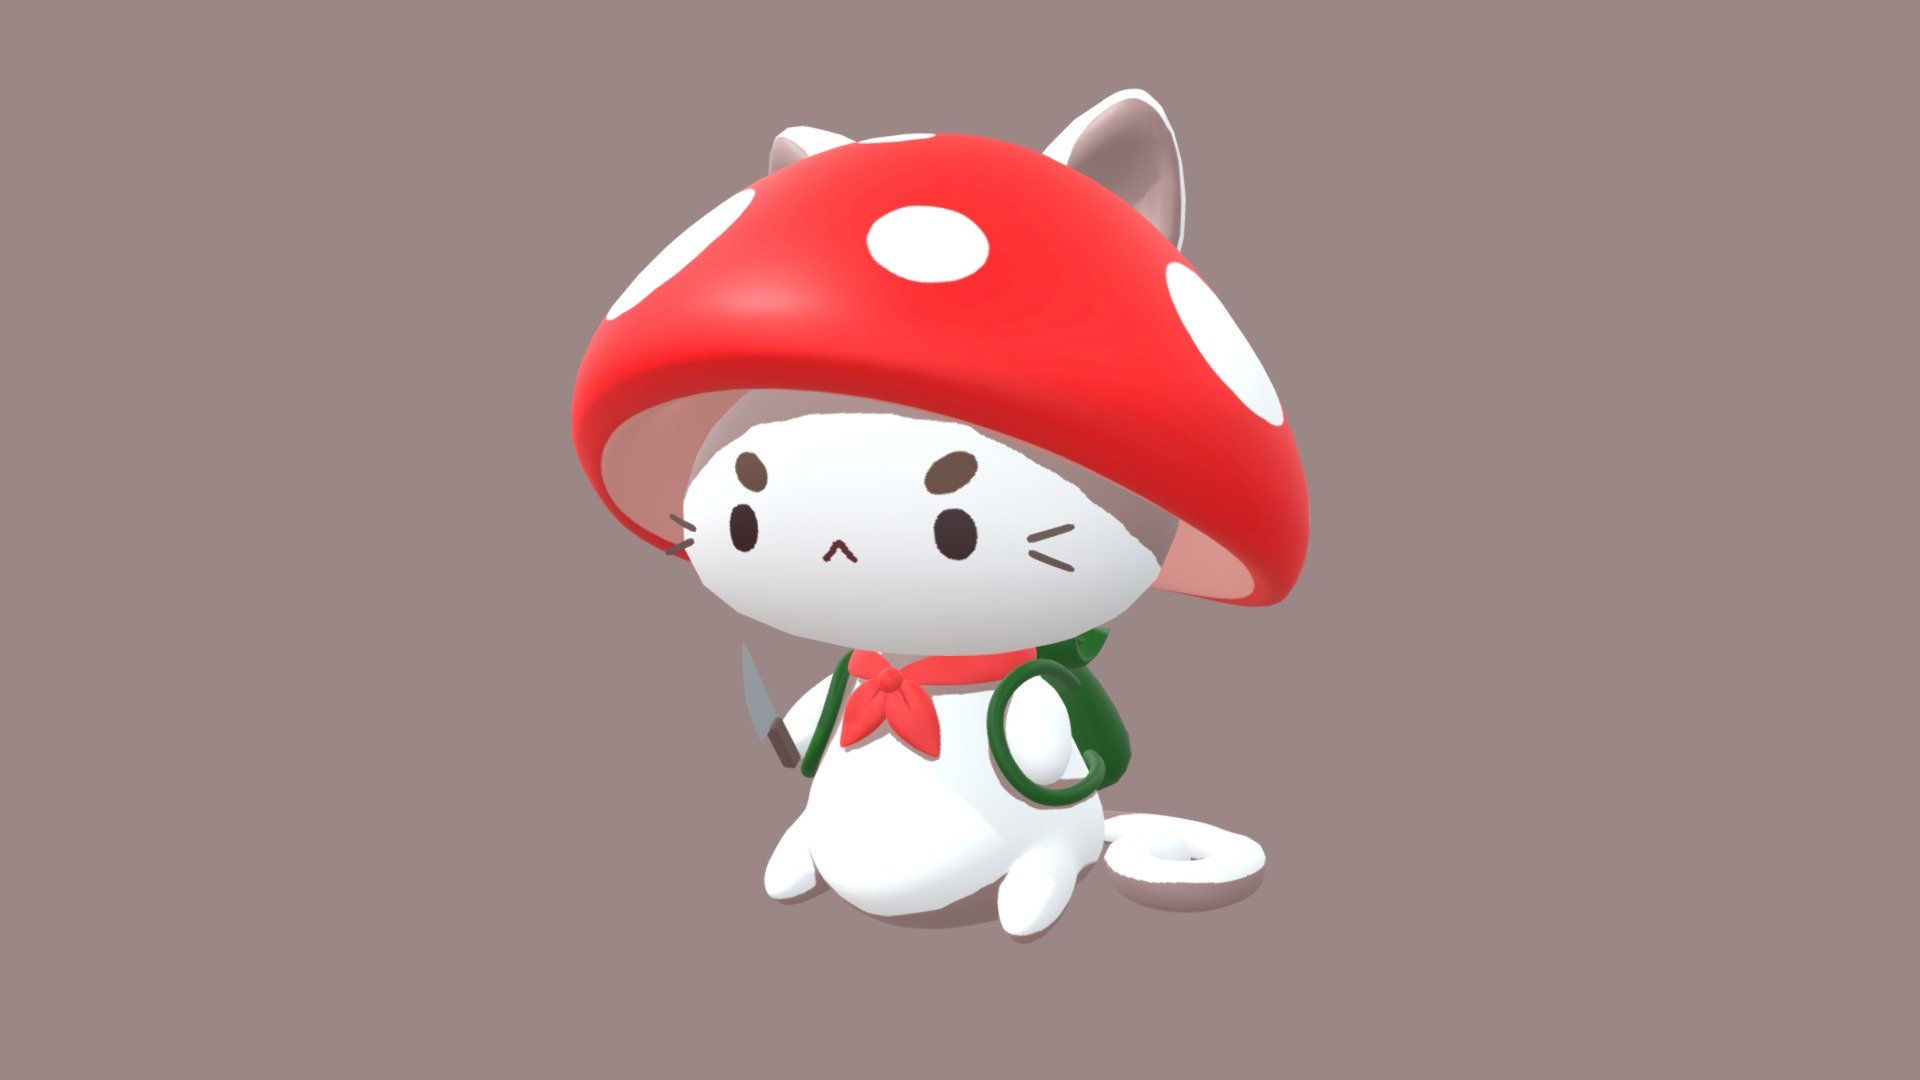 Hi there!
Now I'm a little bit busy, I can't make new things for a while. But at least I have some old and cute artworks, that I can share
Original ref: https://ru.pinterest.com/pin/2392606043987340/ - Mushroom Cat - 3D model by Floretta 3d model